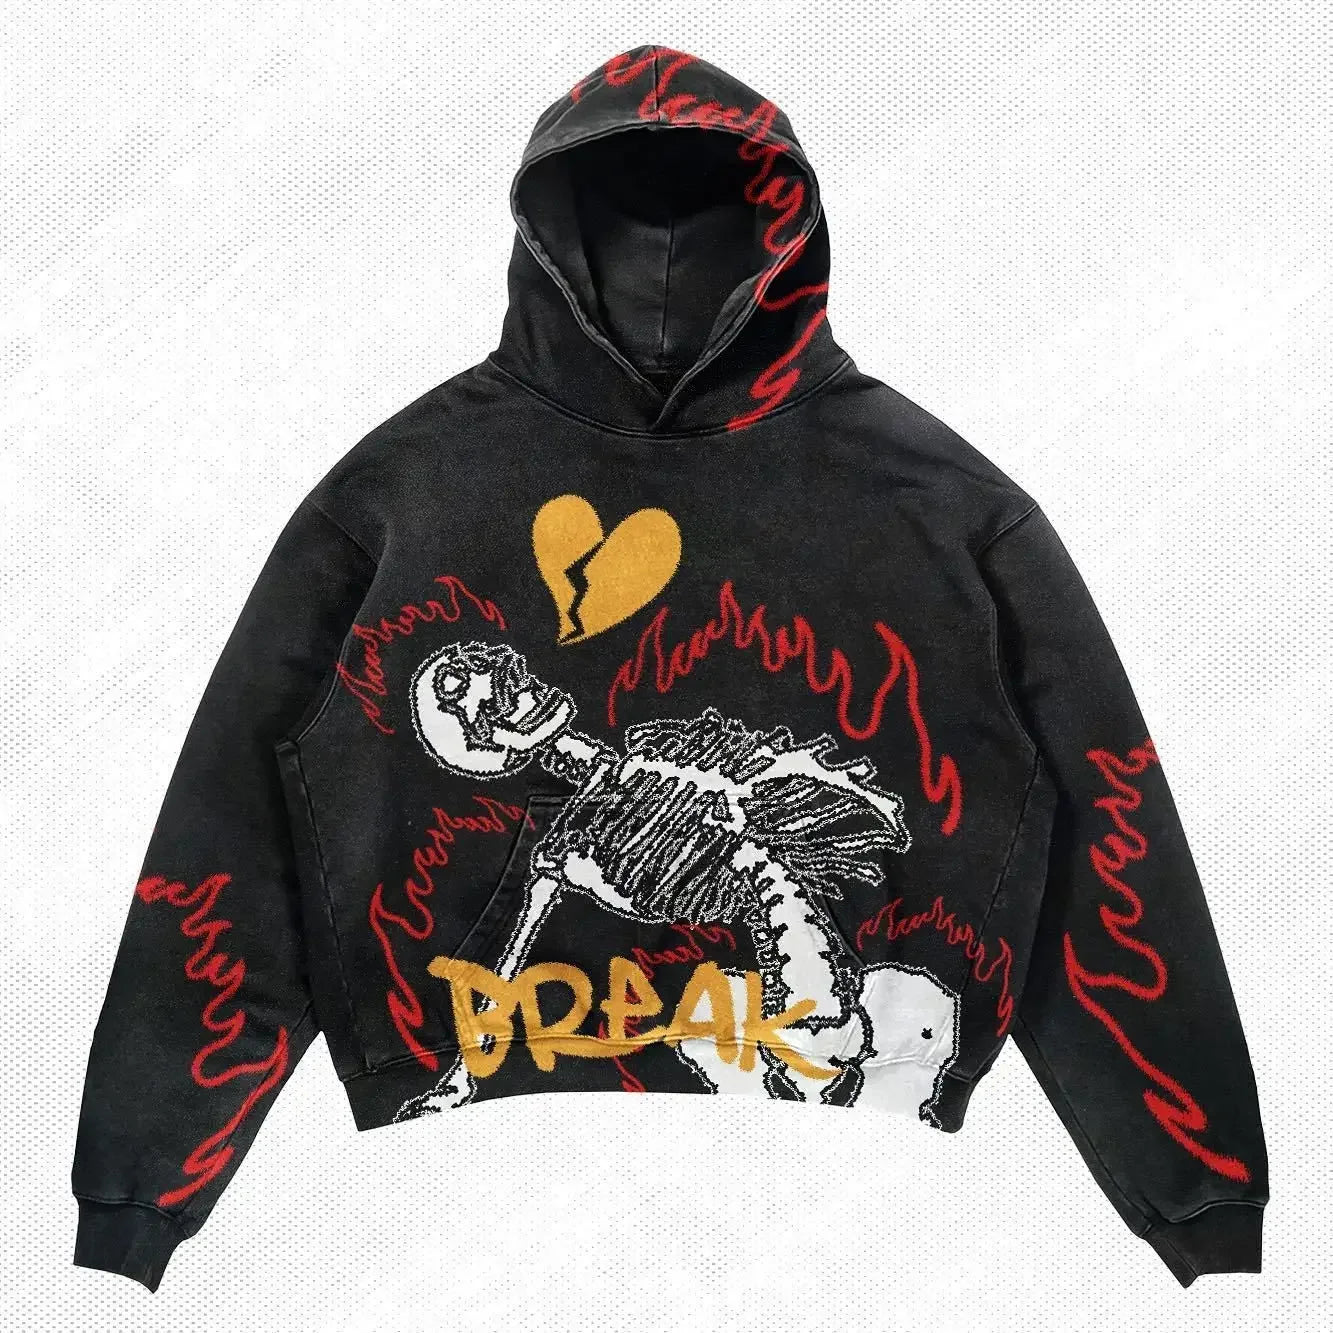 Punk style black hoodie featuring a skeletal figure with a broken heart and red flames. The word "BREAK" is written in yellow at the bottom. Perfect for men's hoodies collections, suitable for four seasons. Introducing the Explosions Printed Skull Y2K Retro Hooded Sweater Coat Street Style Gothic Casual Fashion Hooded Sweater Men's Female by Maramalive™.